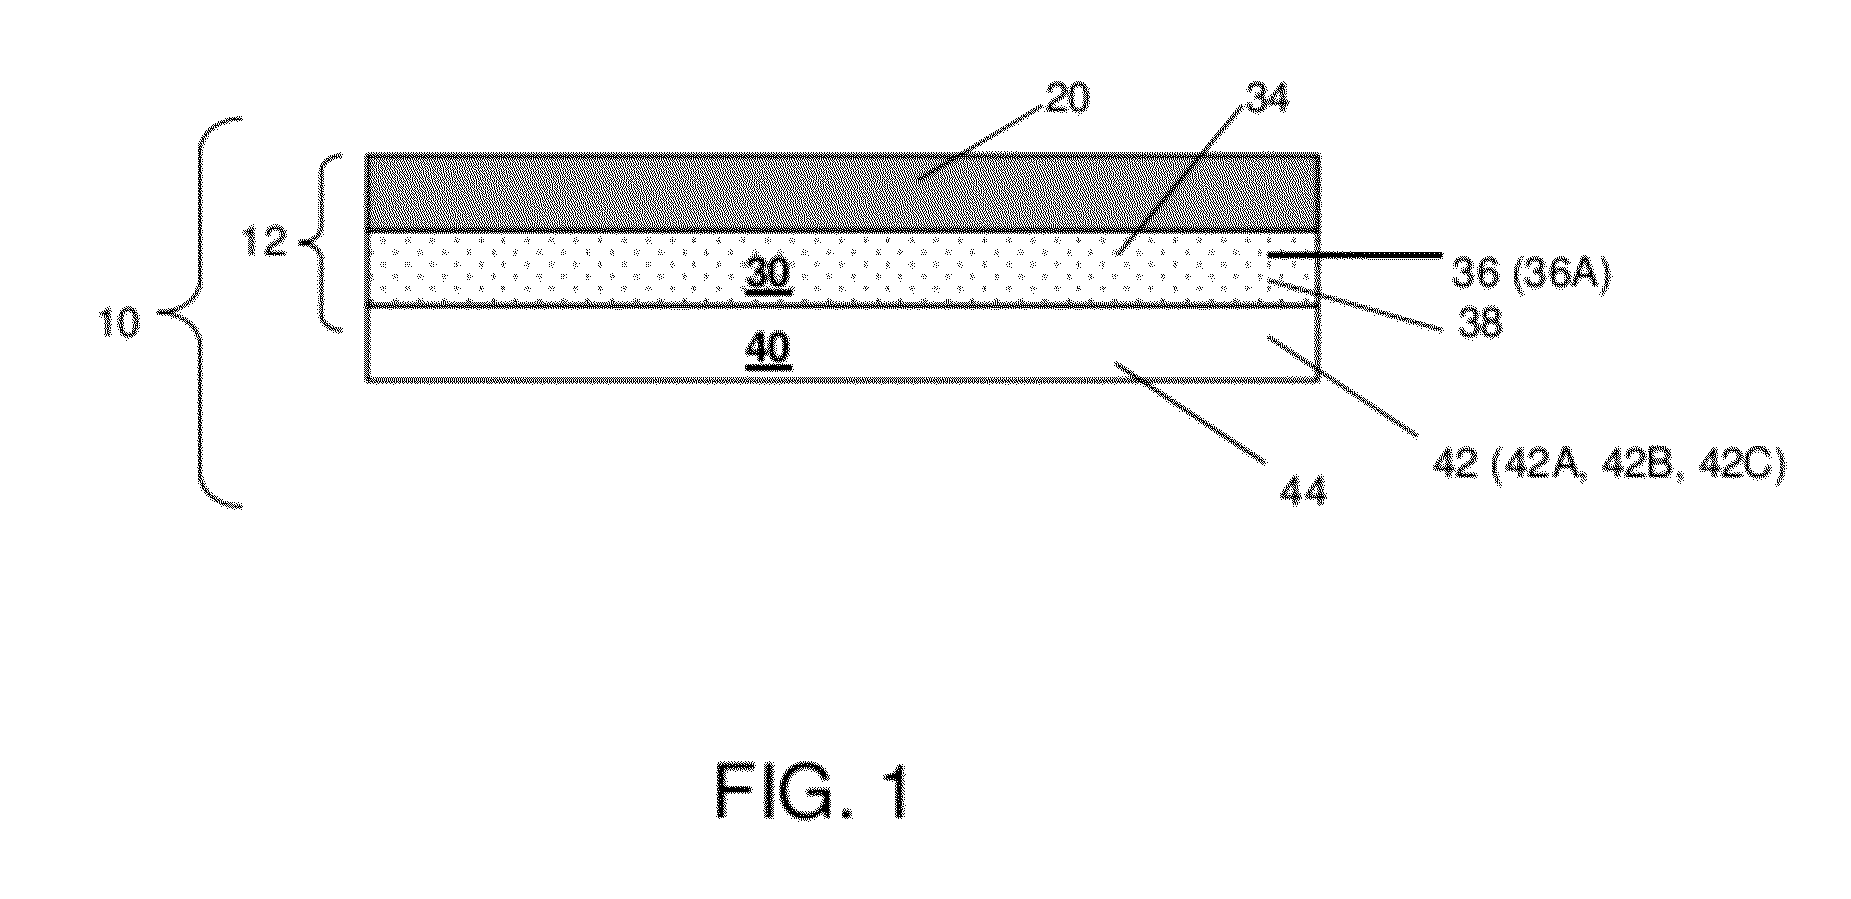 Lithium-based anode with ionic liquid polymer gel